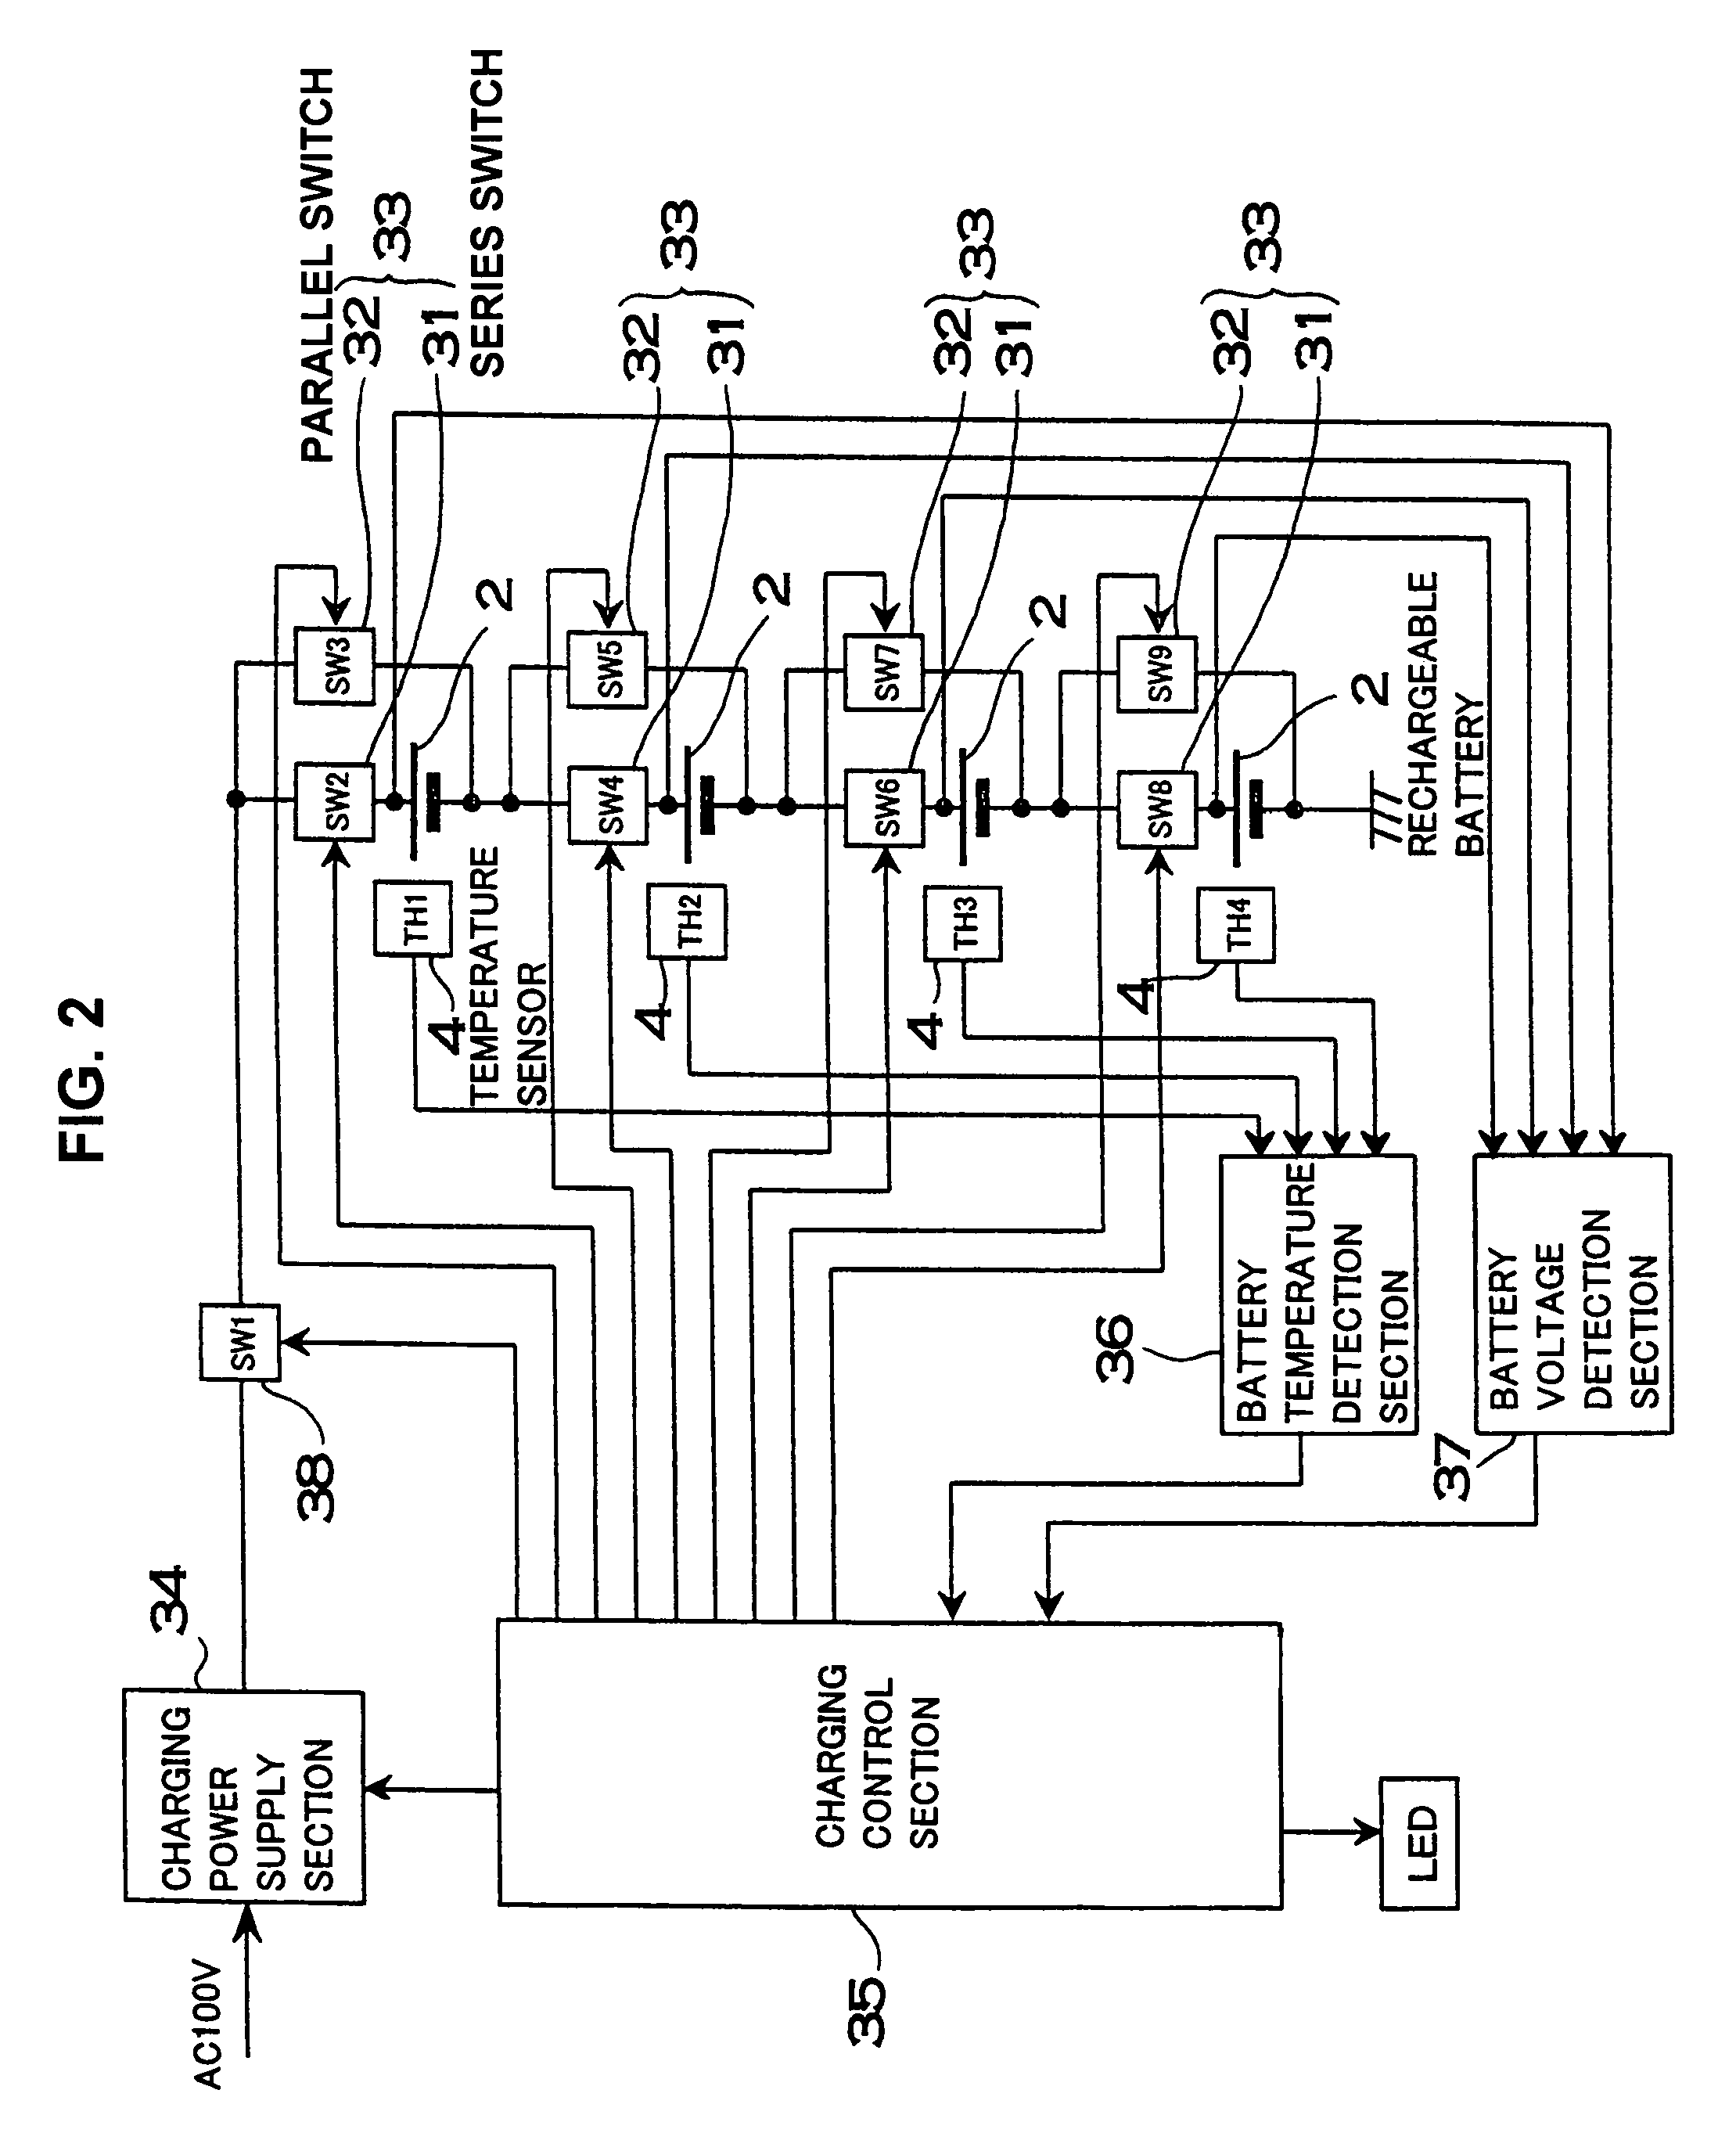 Battery charging apparatus for charging a plurality of batteries